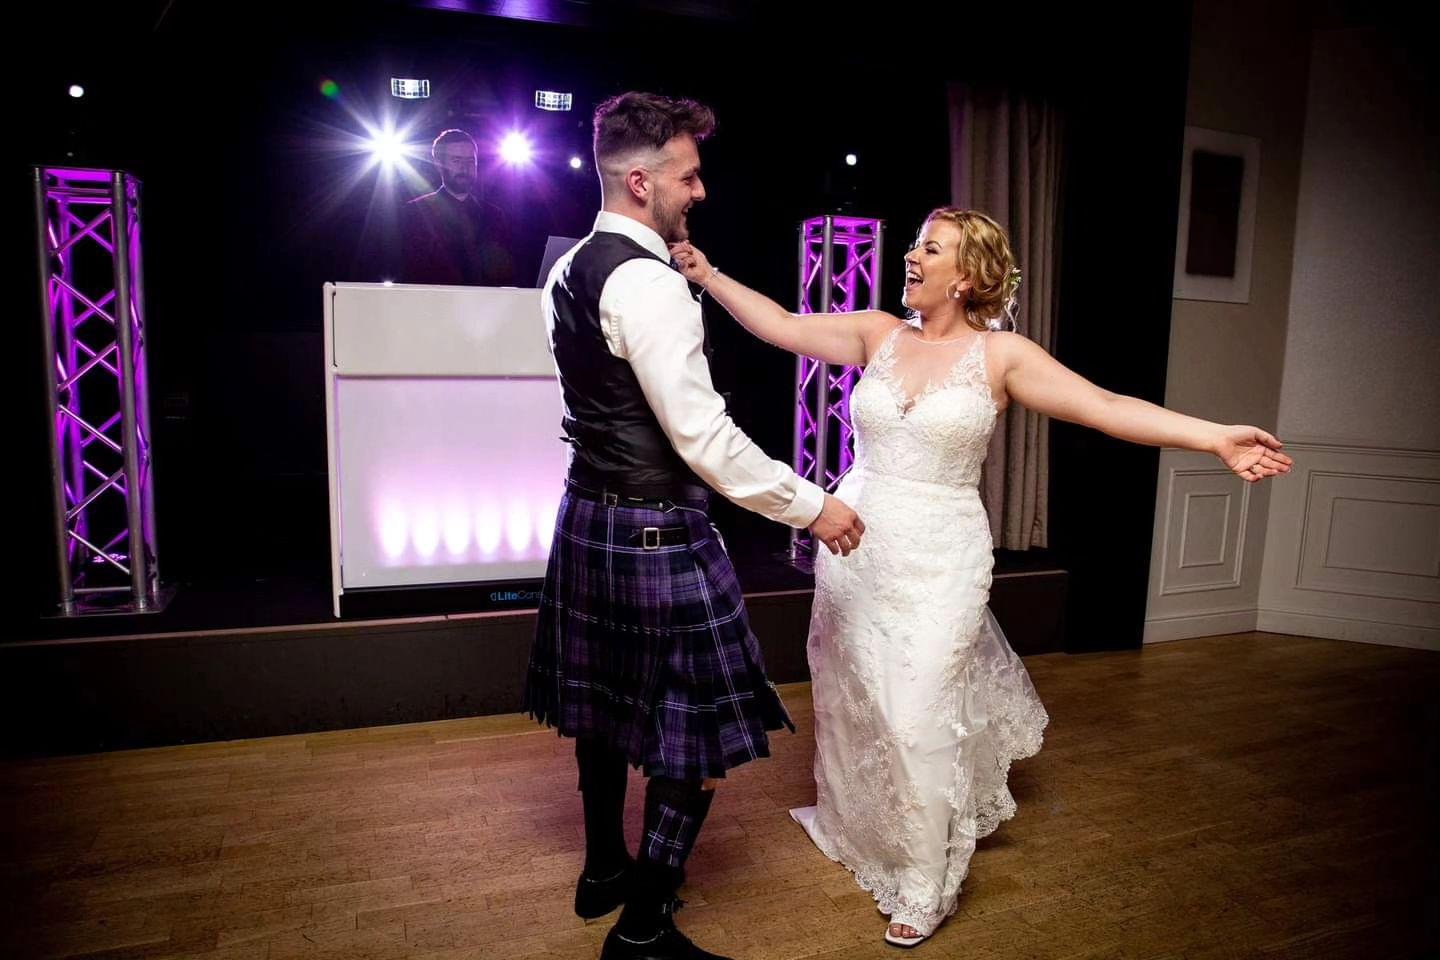 a bride and groom dance on a dancefloor with a dj in the background